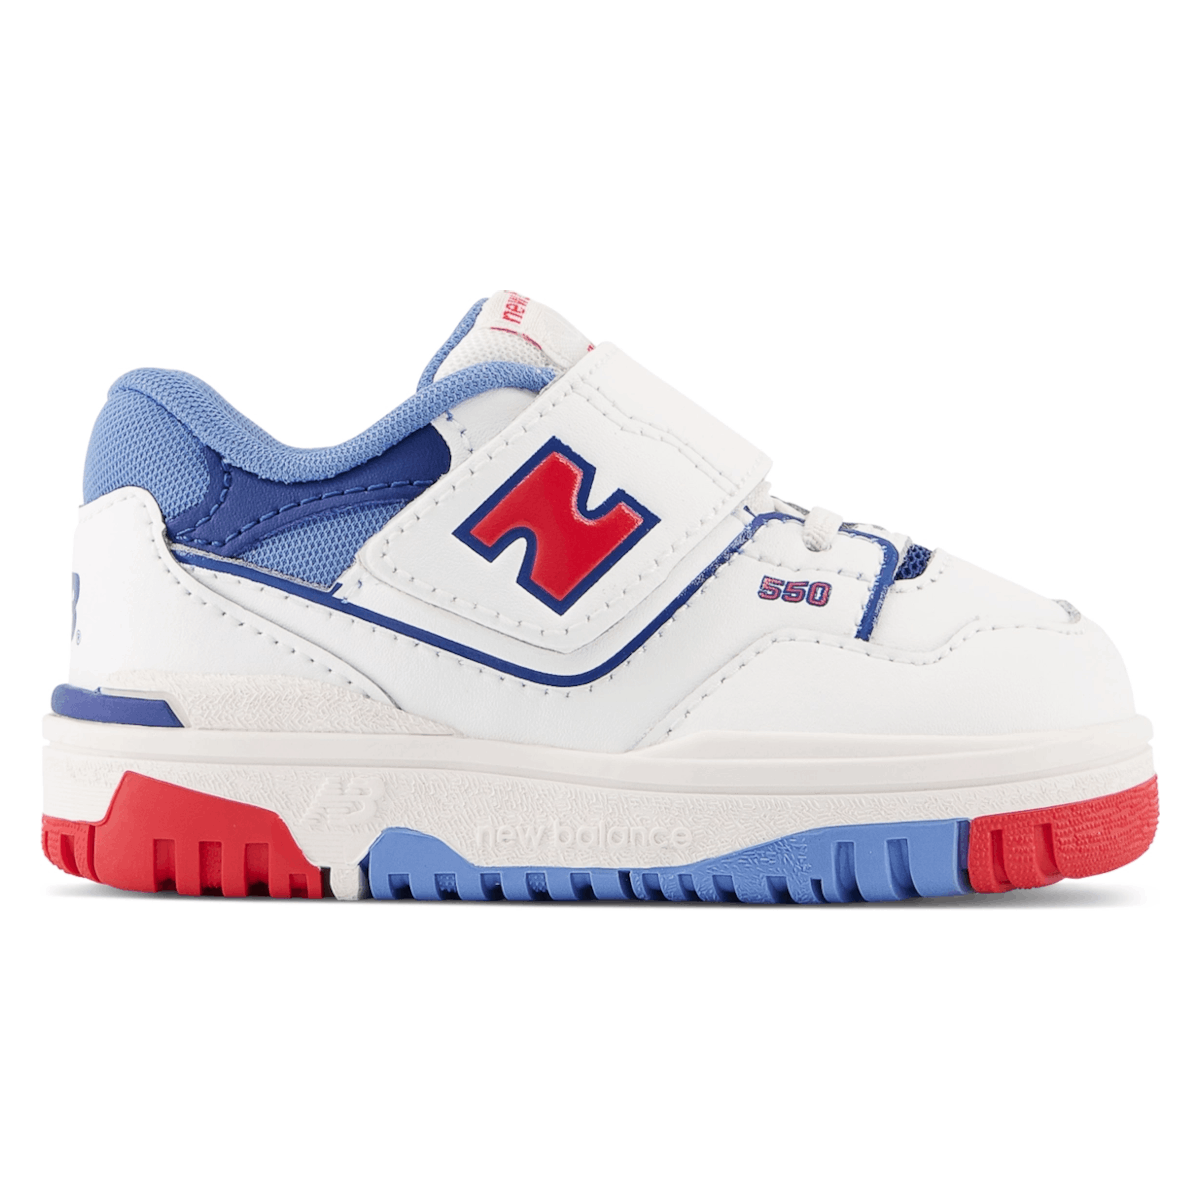 New Balance 550 Bungee Lace with Top Strap